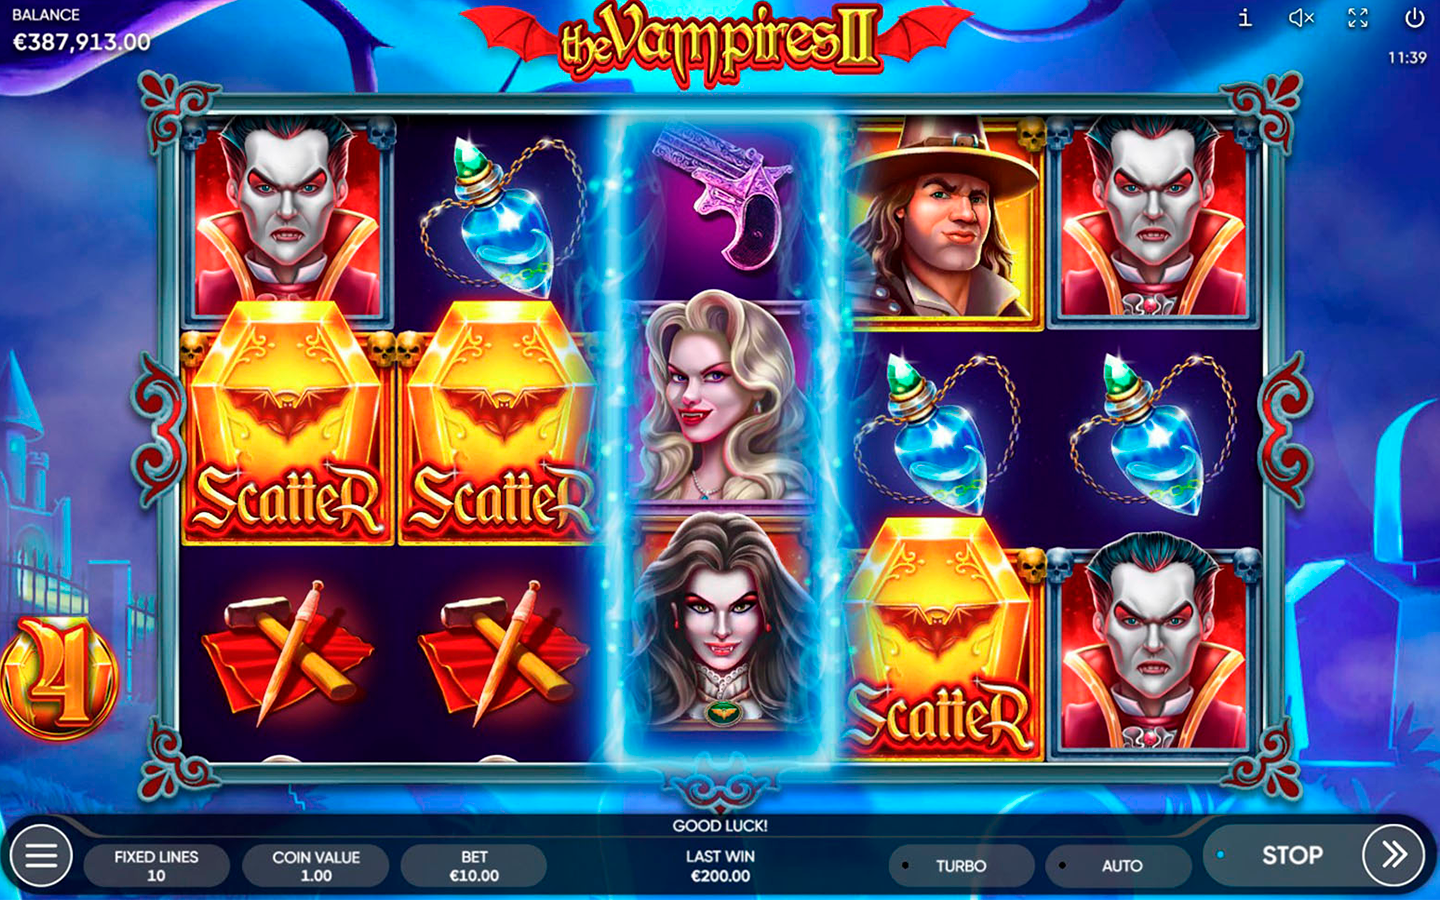 ONLINE CASINO SOFTWARE 2022 | New game release by Endorphina!